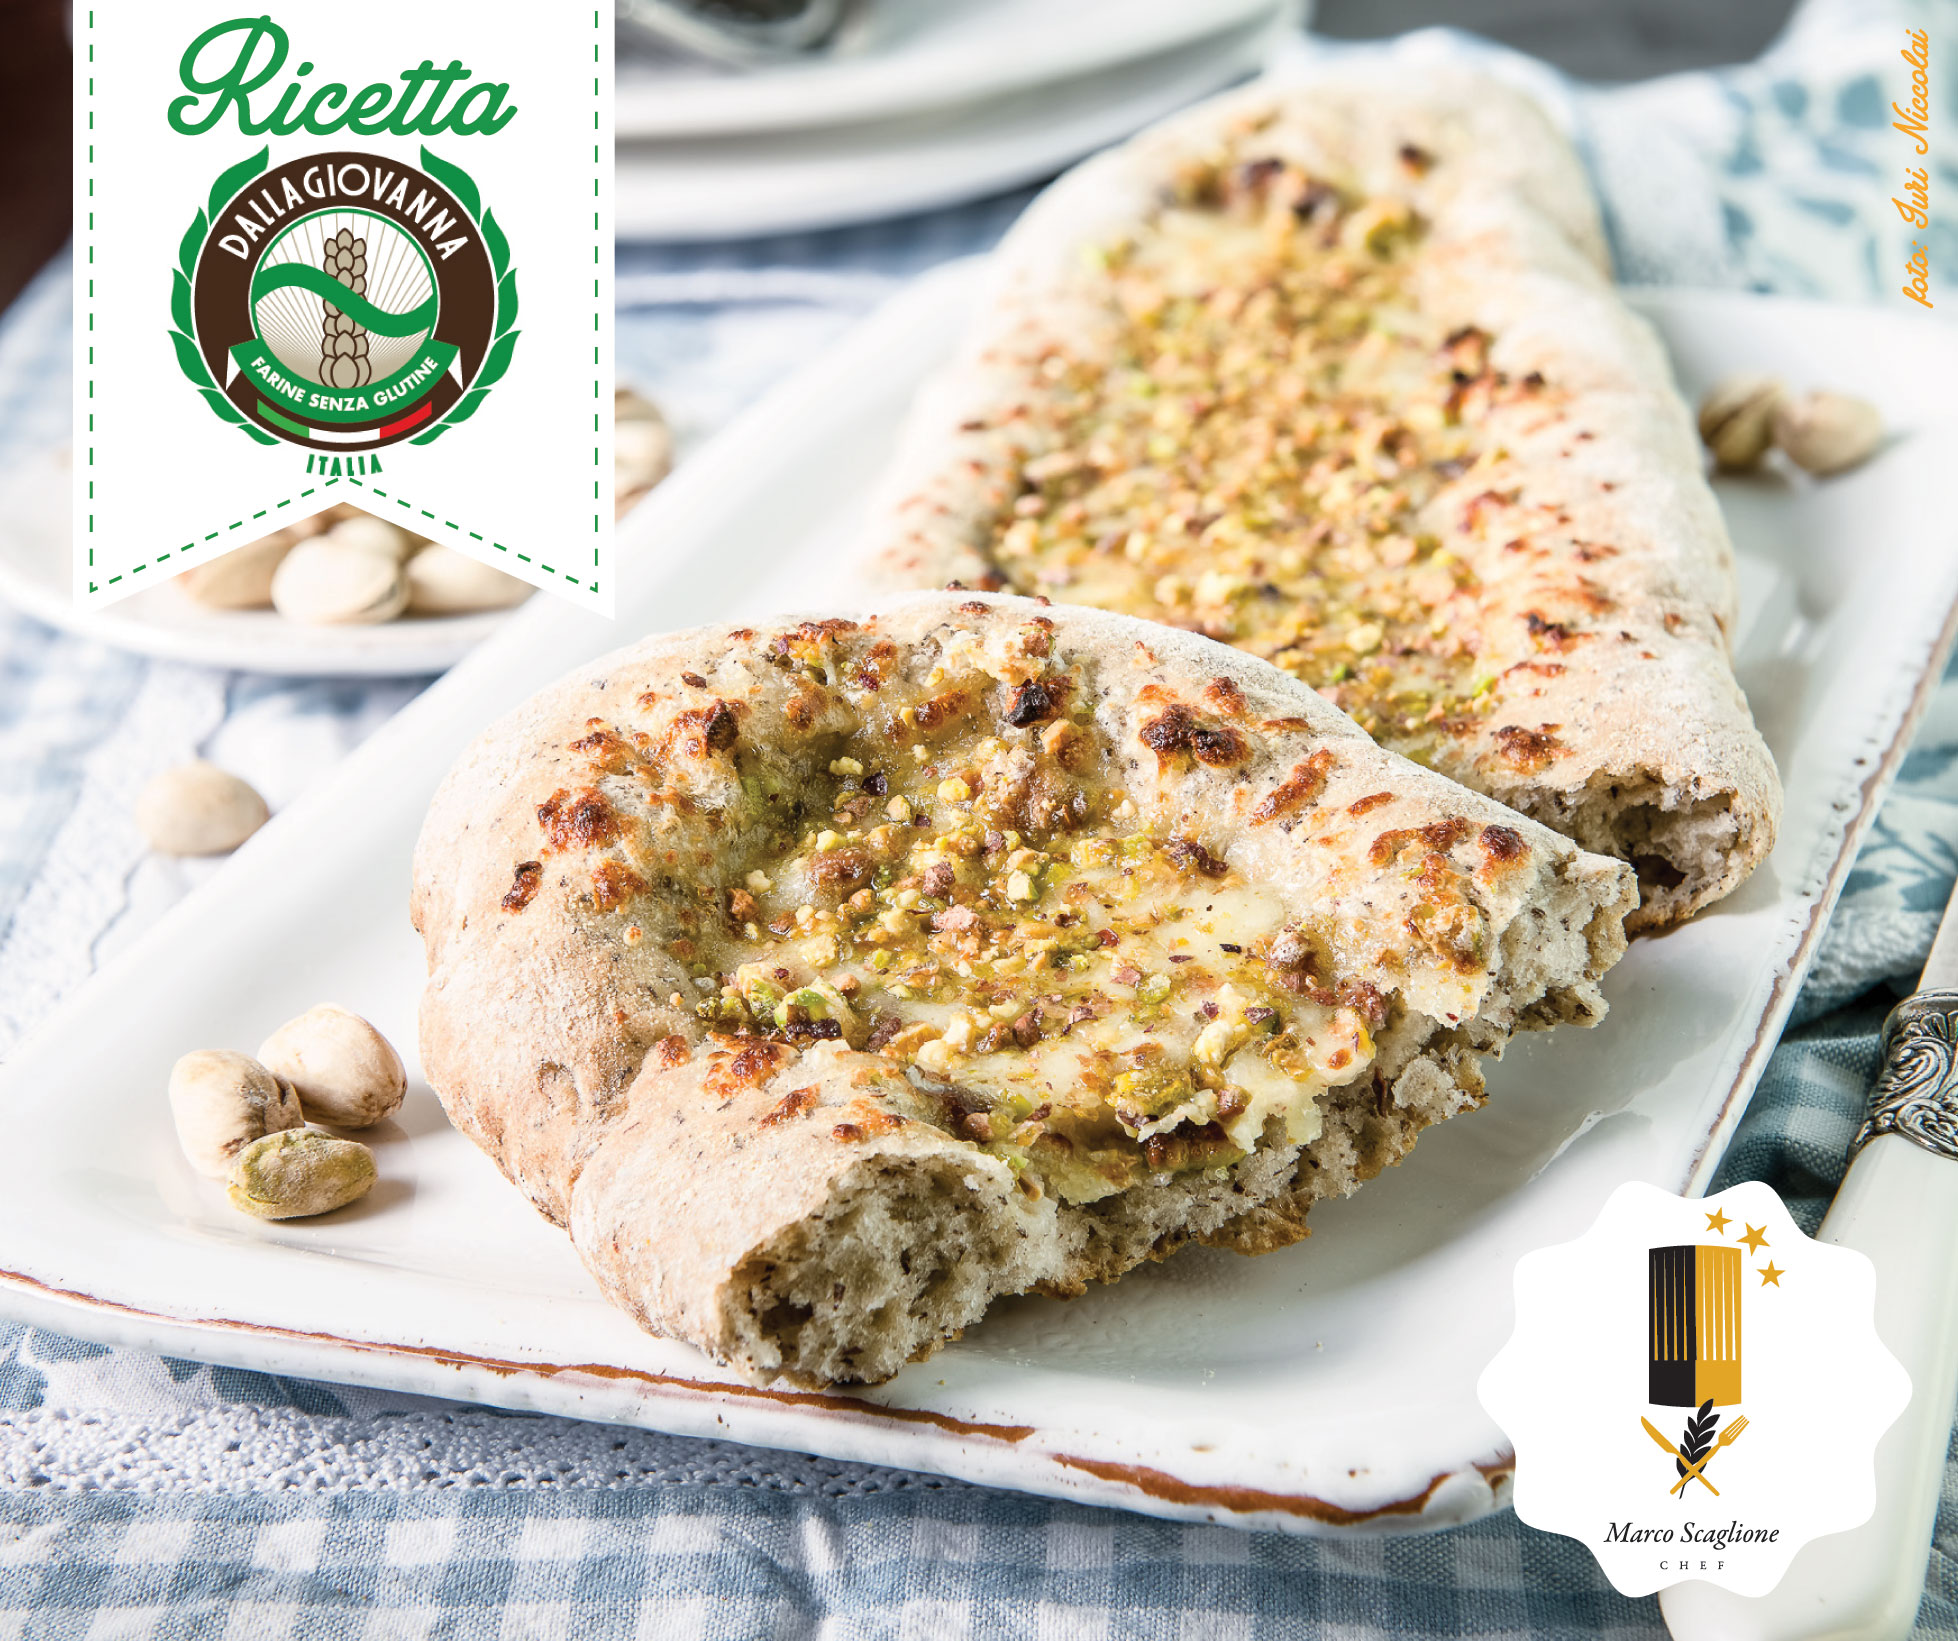 Gluten-free pizza with shovel with provola and pistachio 